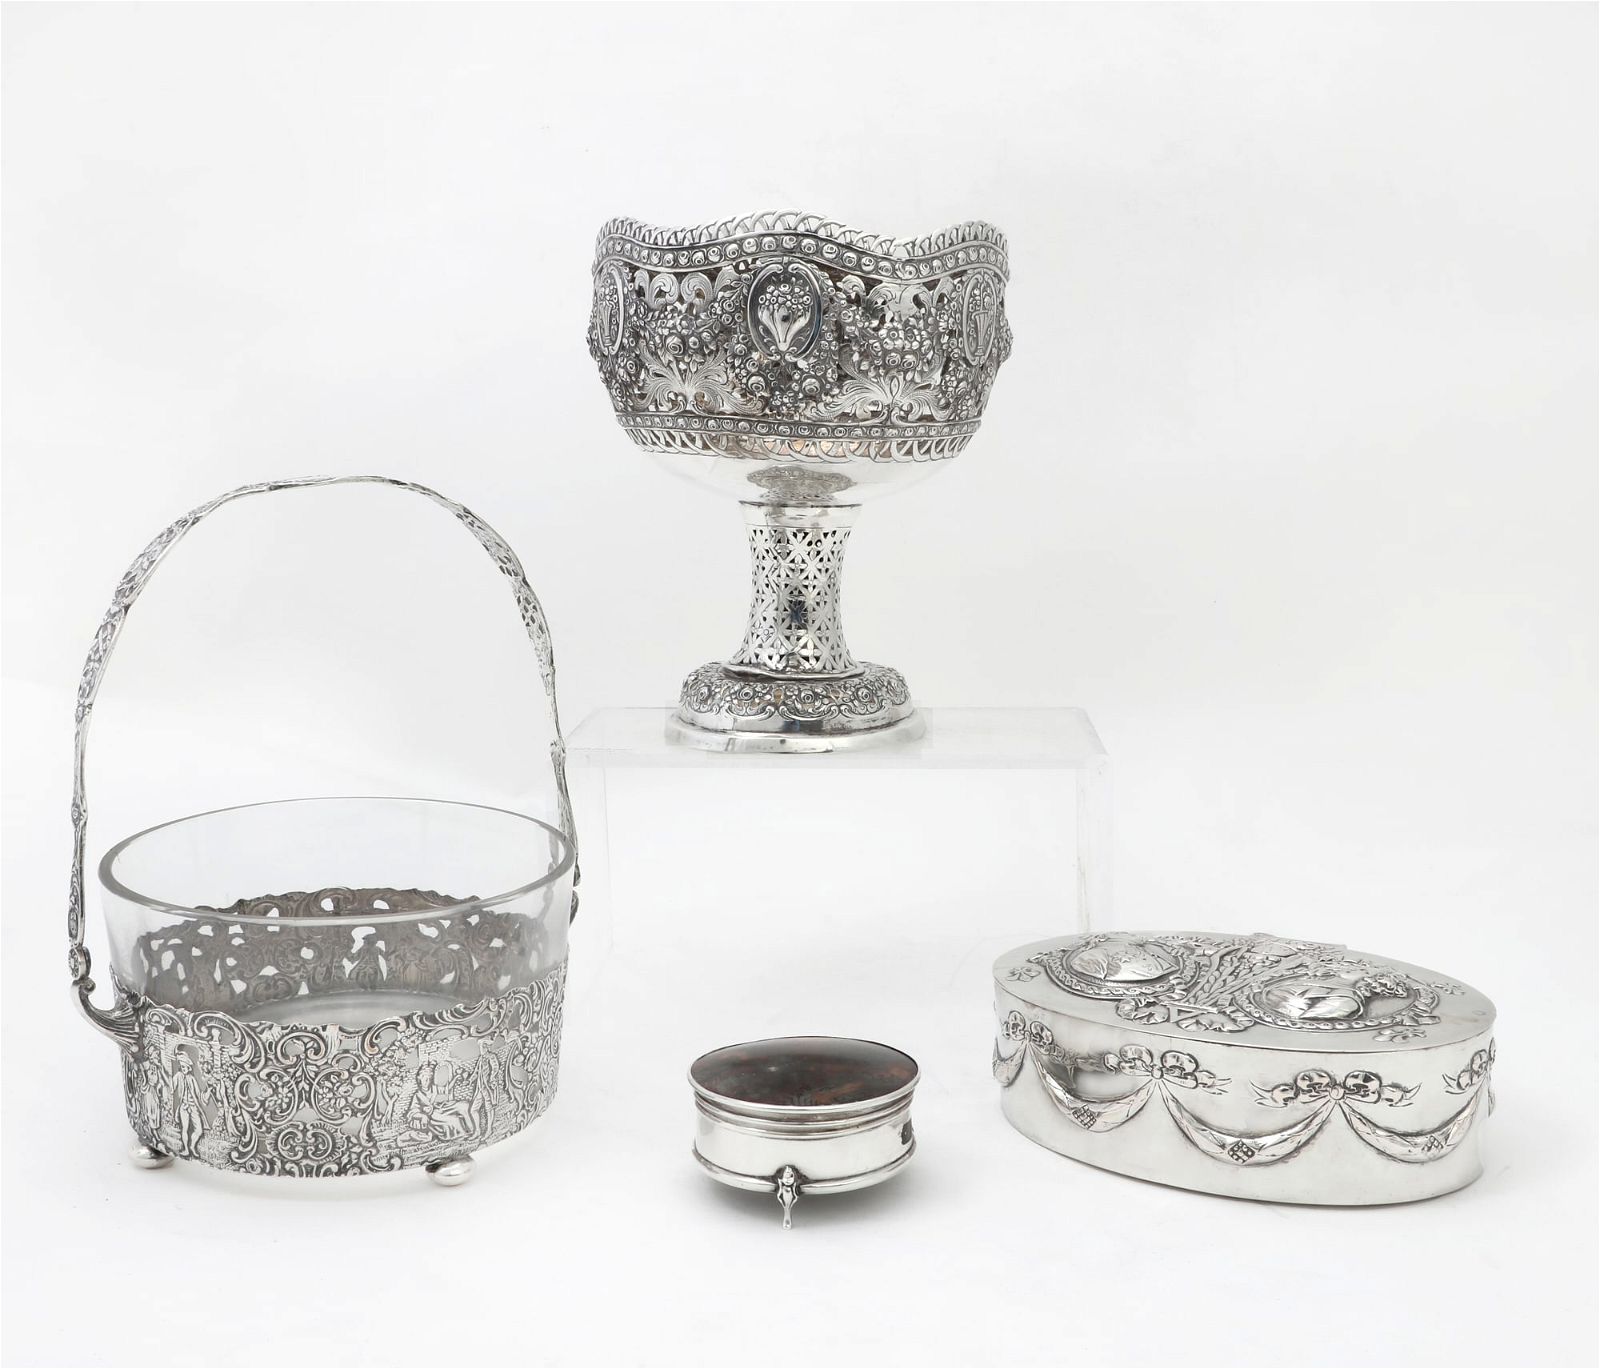 THREE GERMAN SILVER AND METALWARE